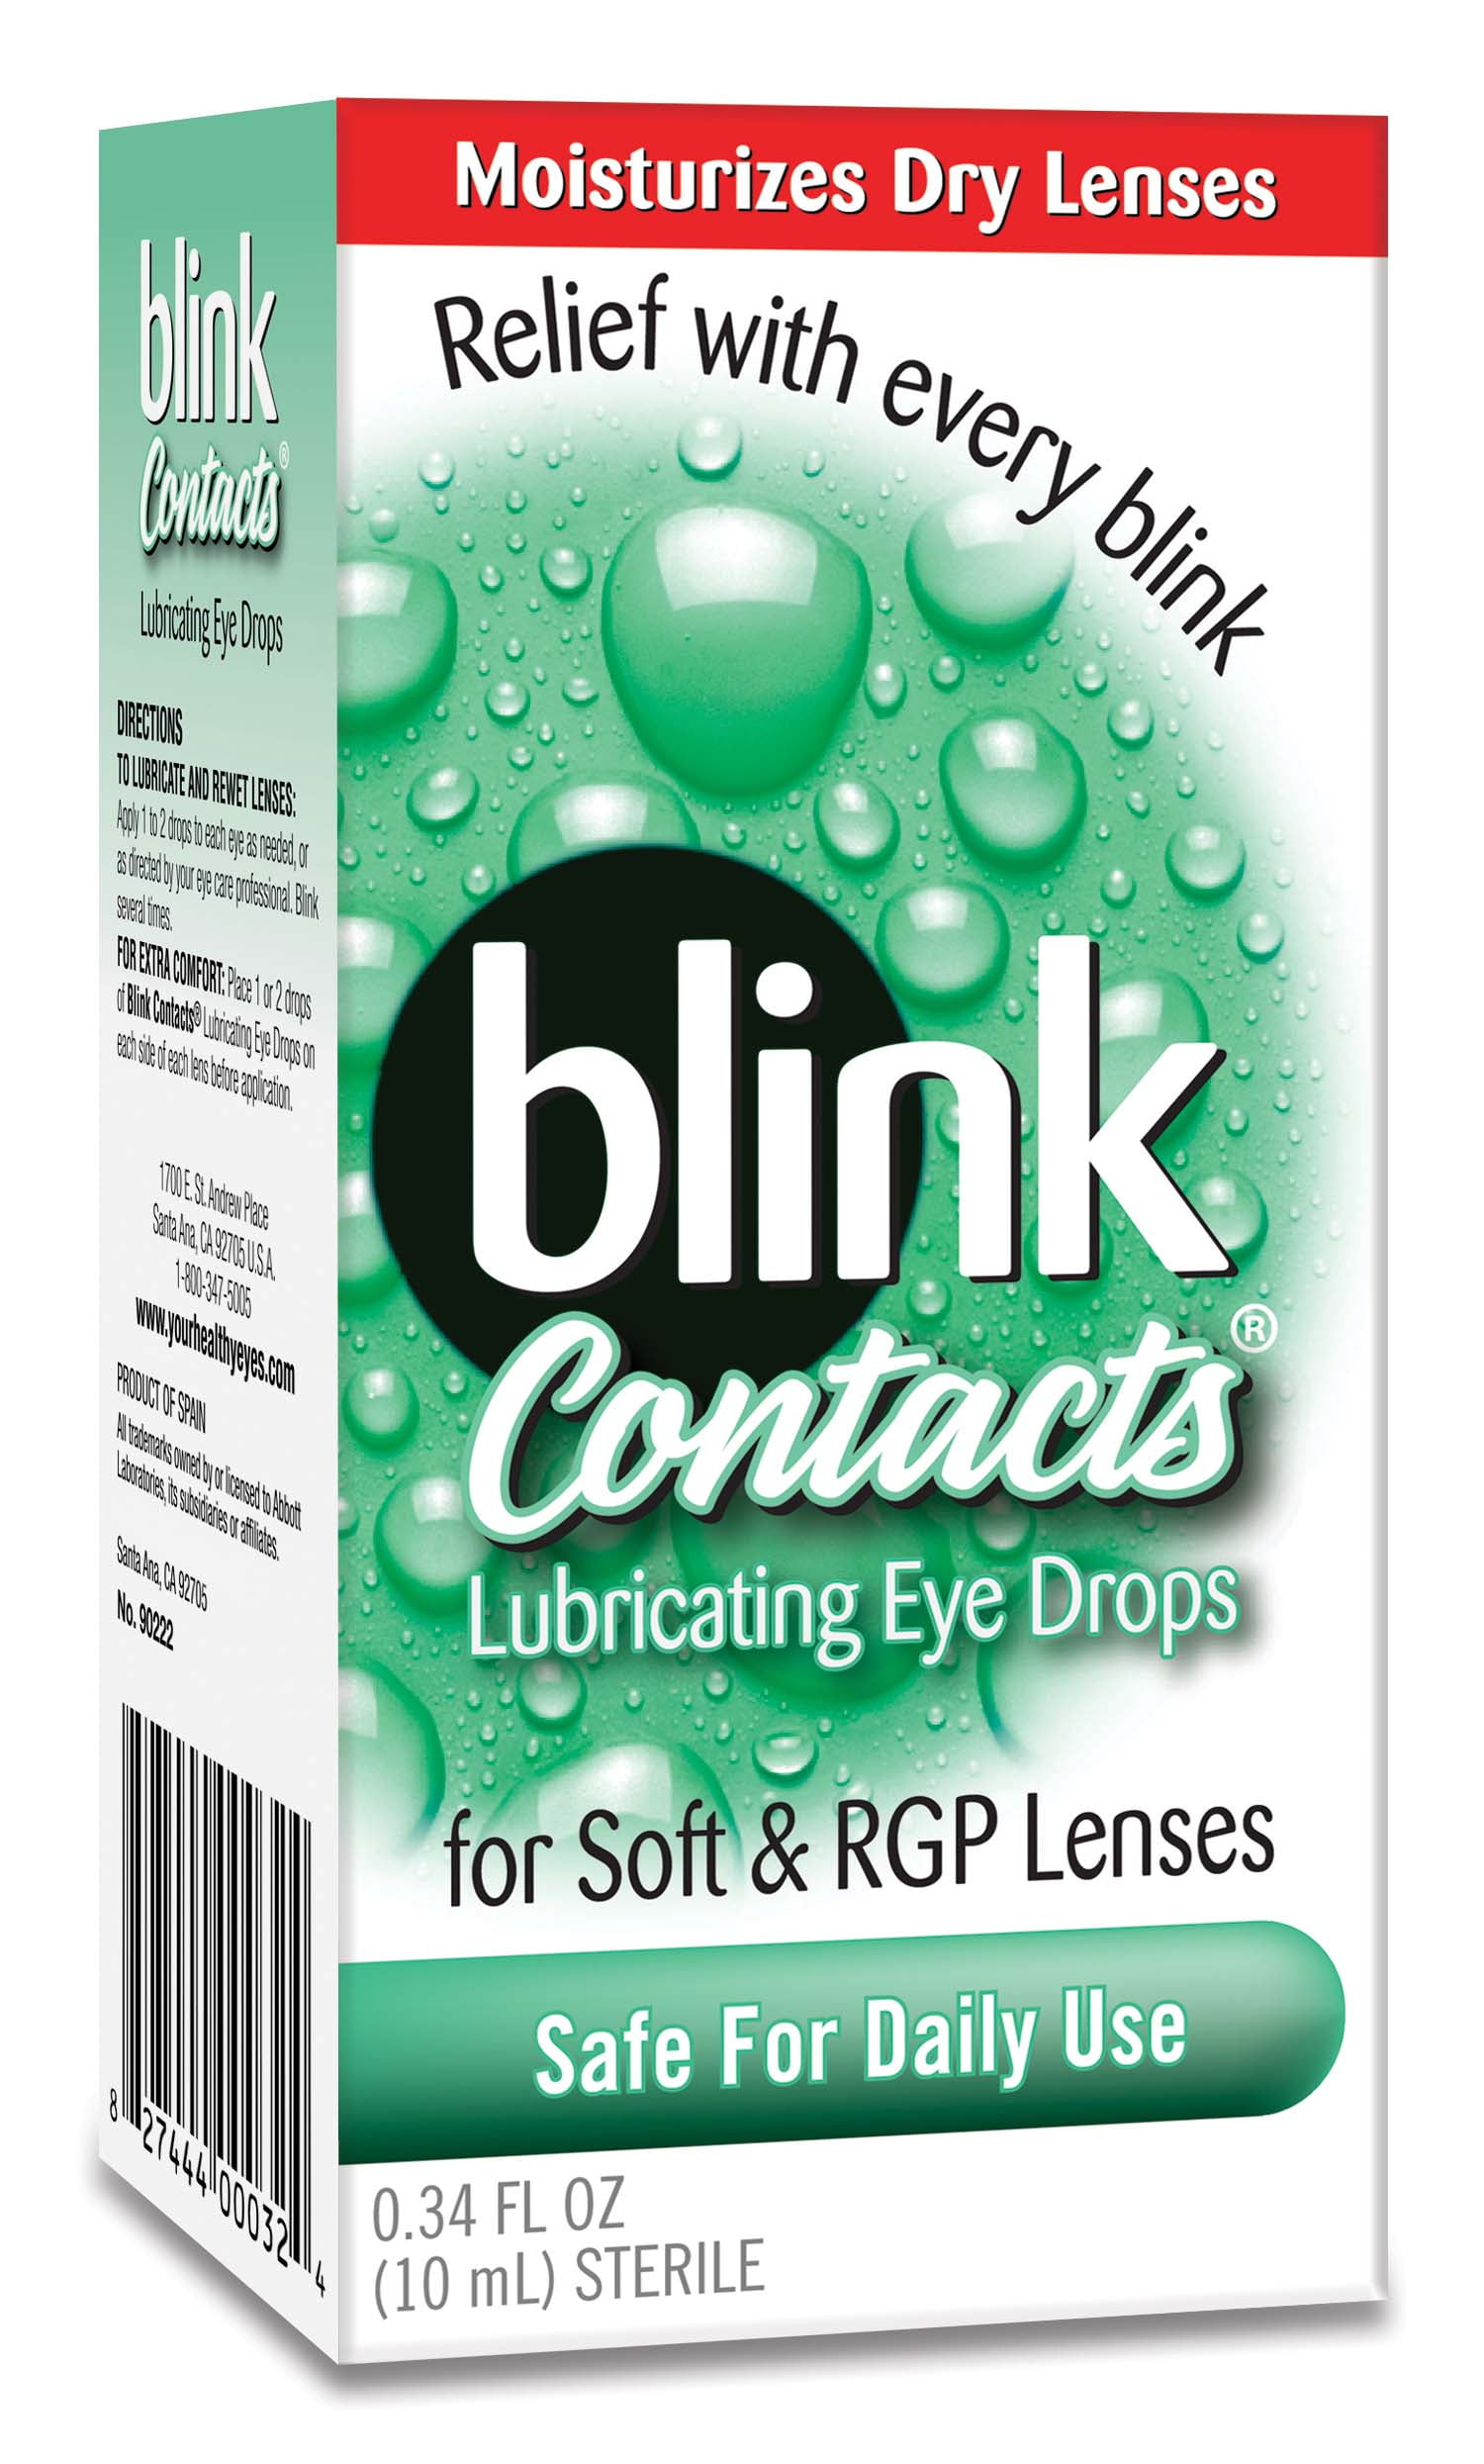 Blink Contacts